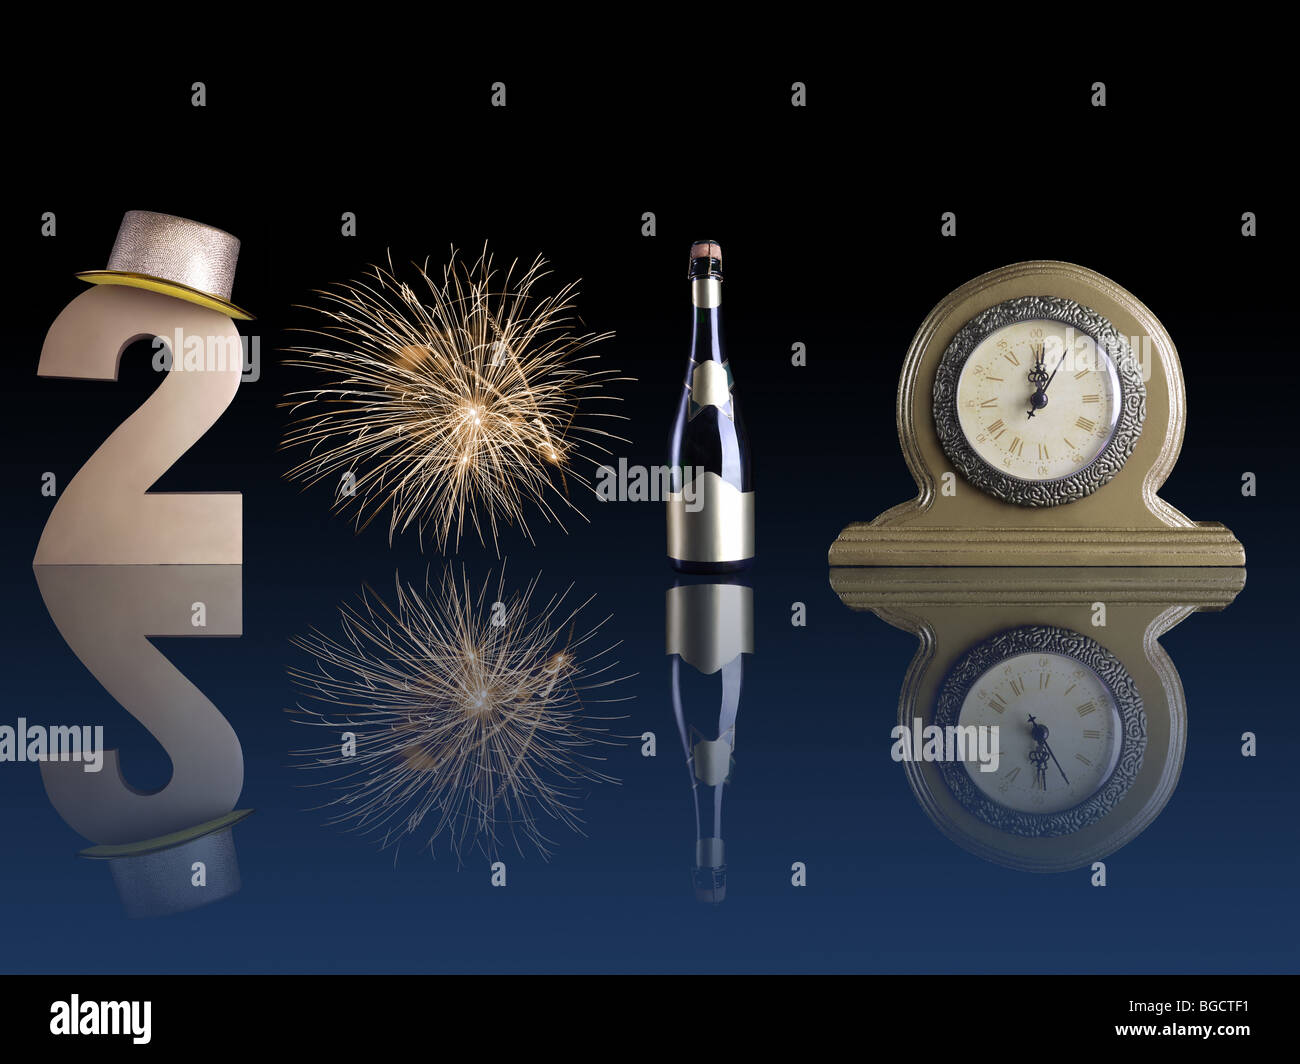 New Year 2010 composed of golden digit two, fireworks burst, bottle of champagne and table clock reflecting on dark blue surface Stock Photo